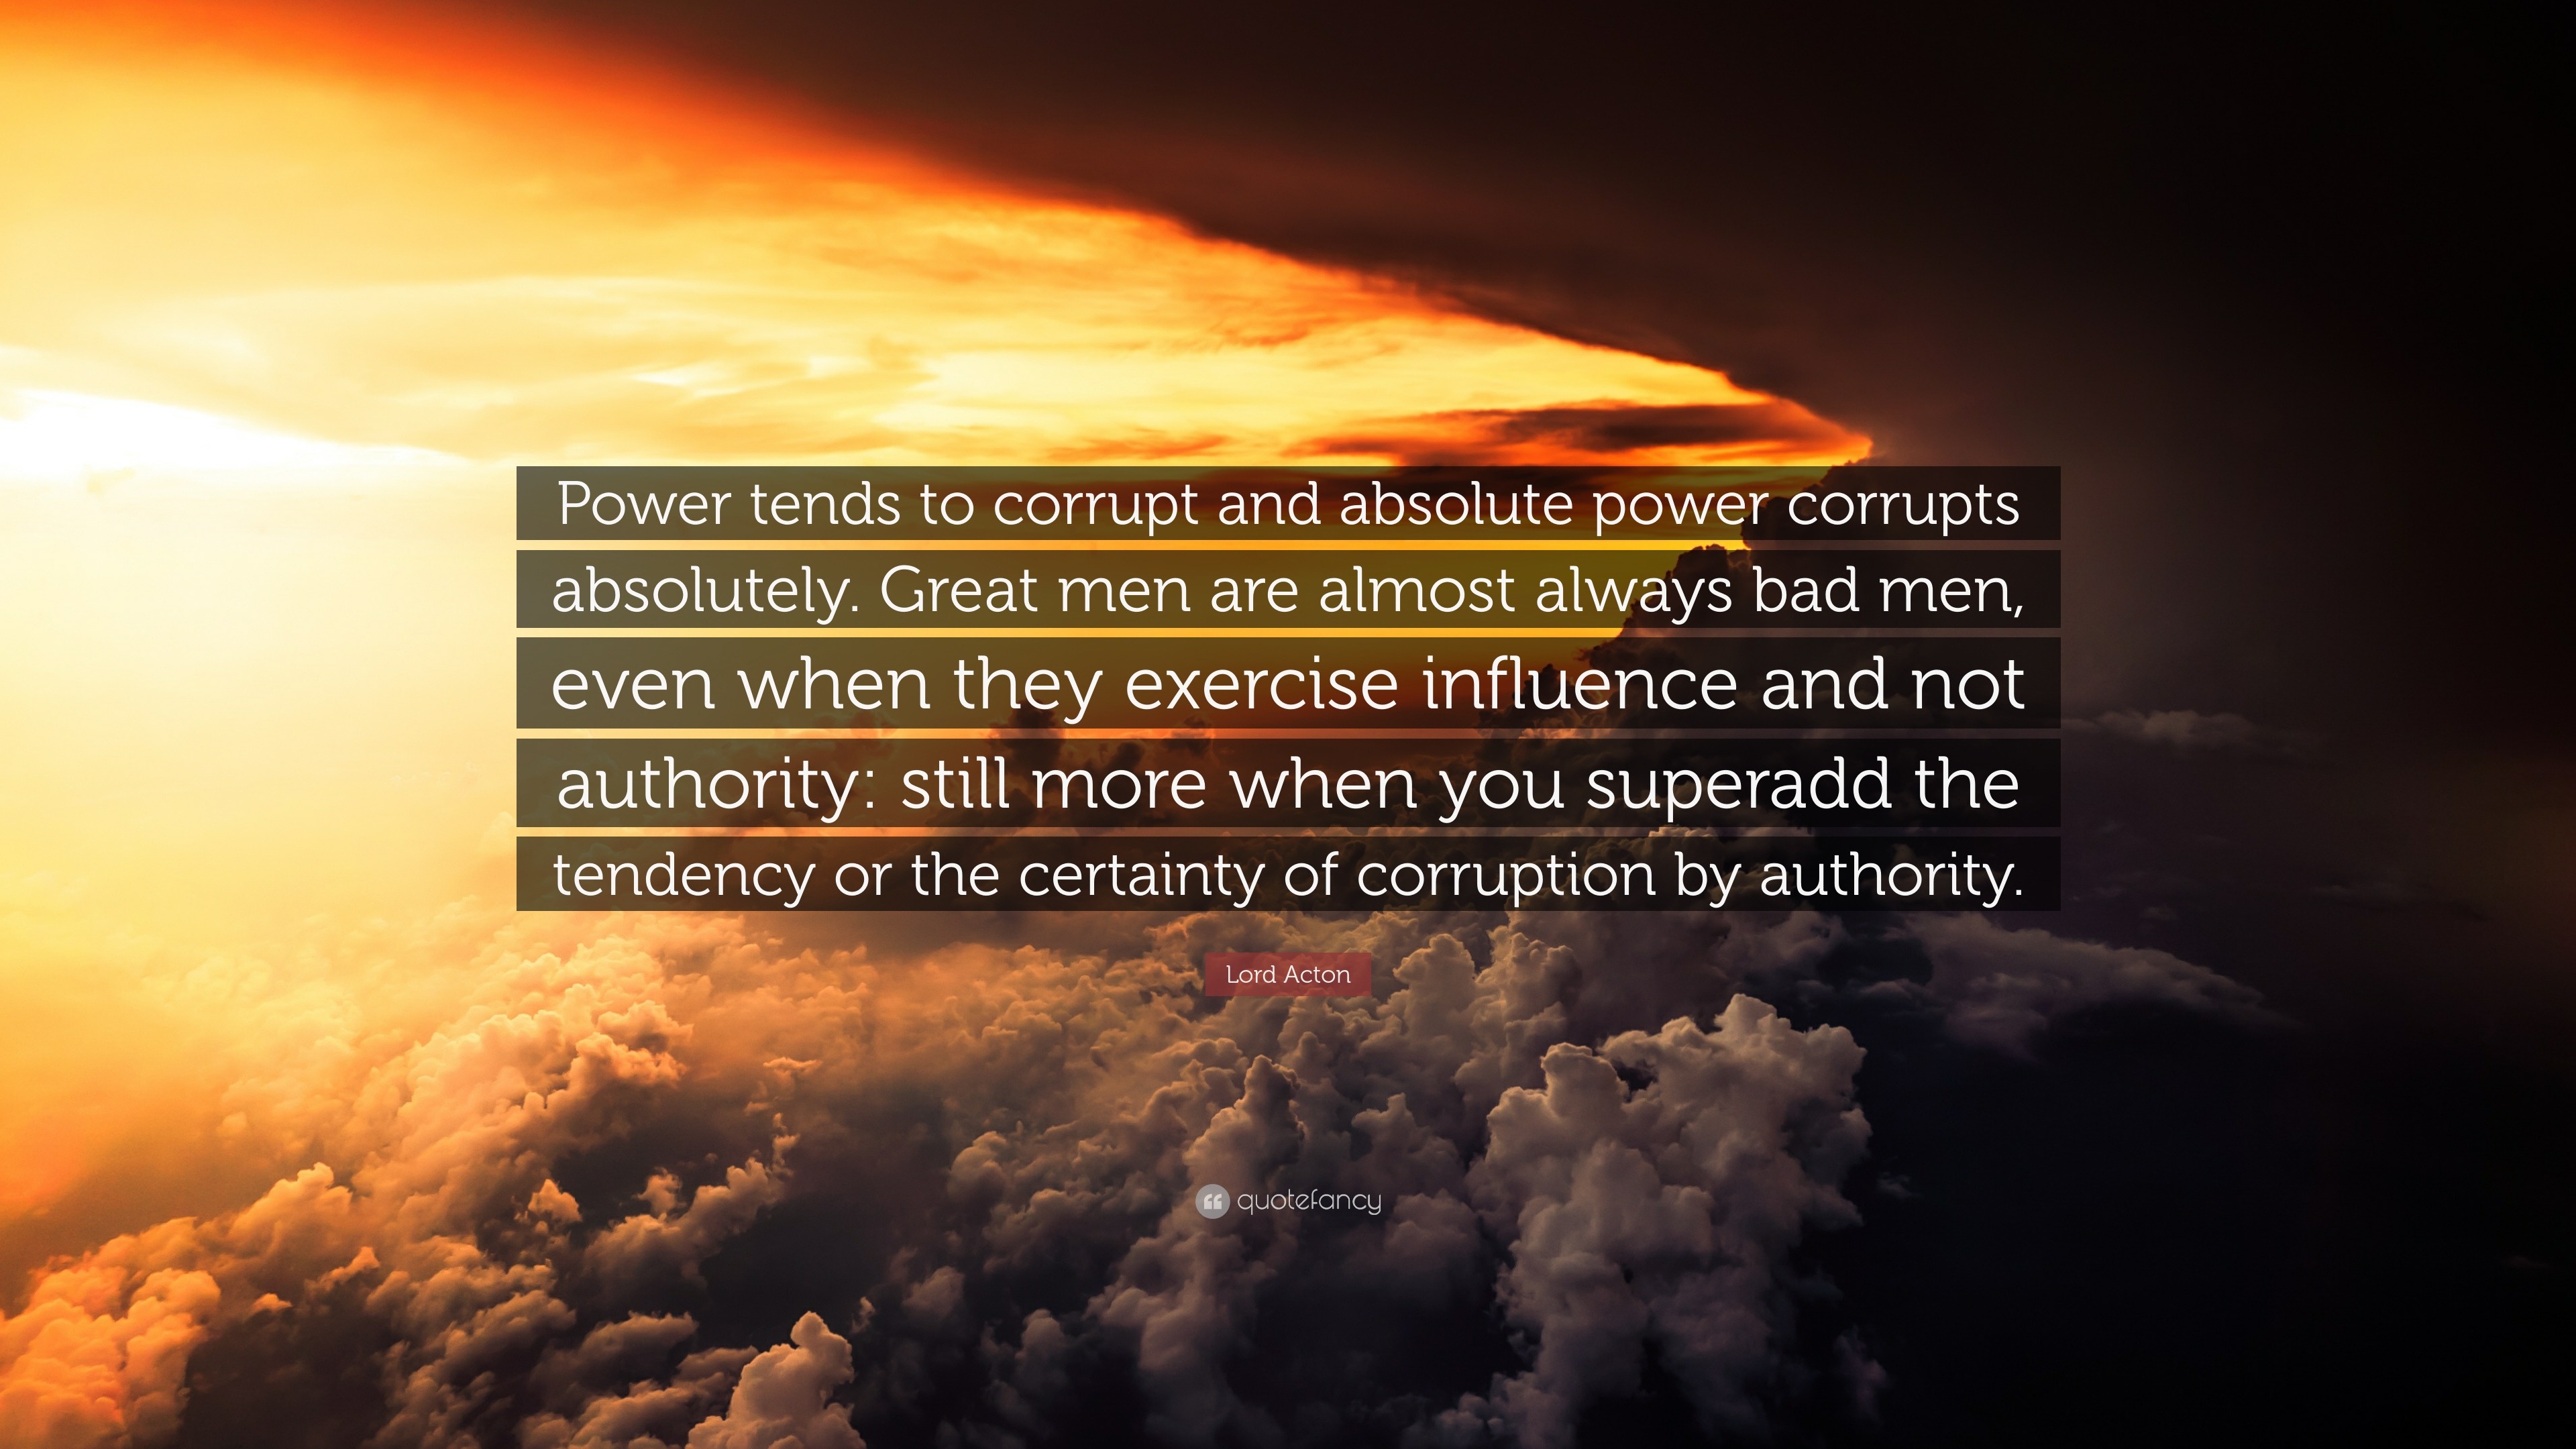 Lord Acton Quote: 